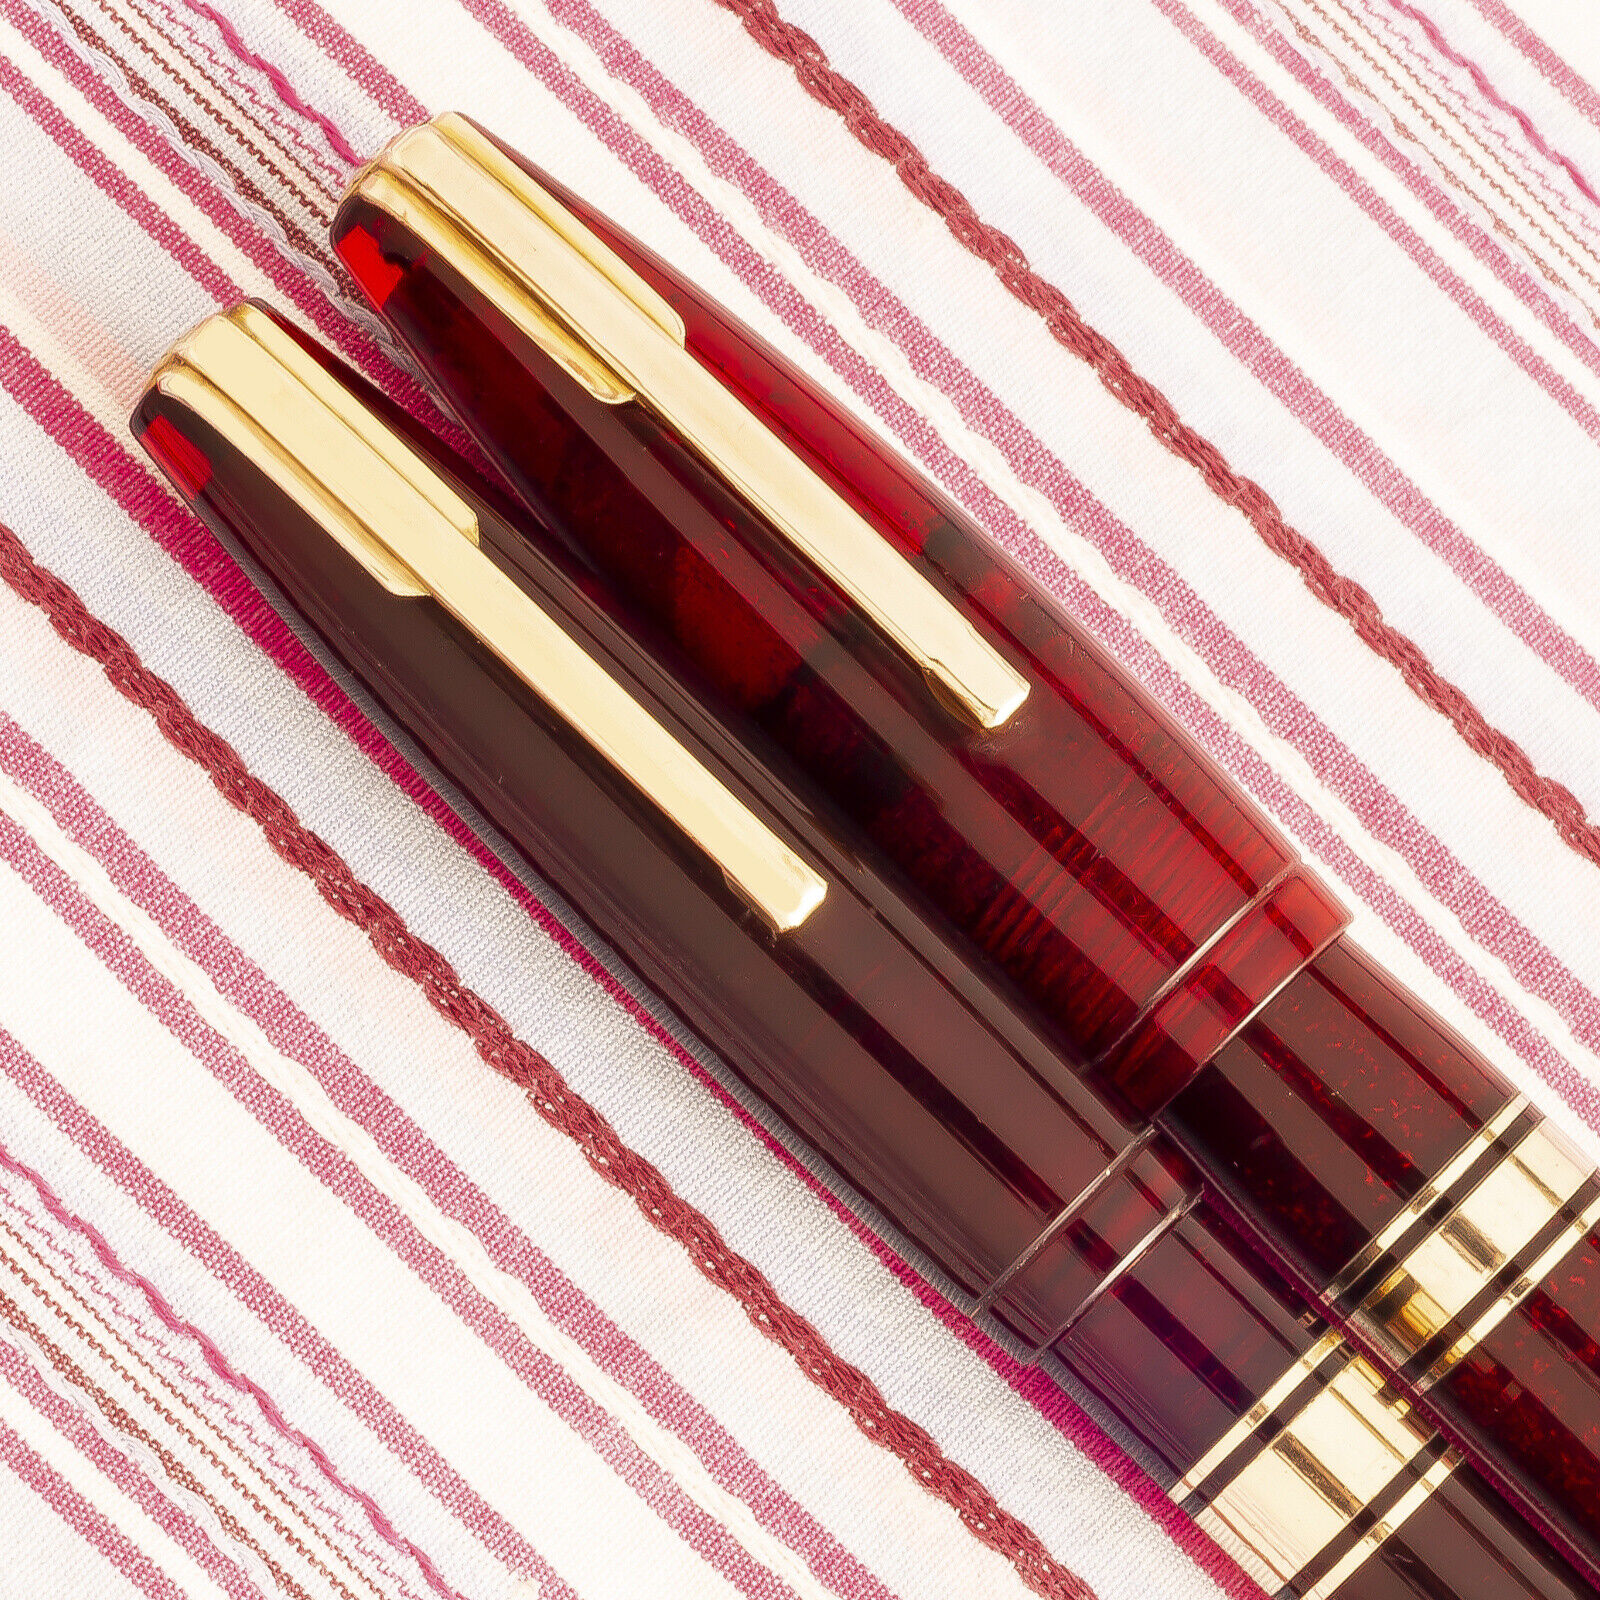 Waterman Hundred Year Red Jewel Fountain Pen Pencil Set